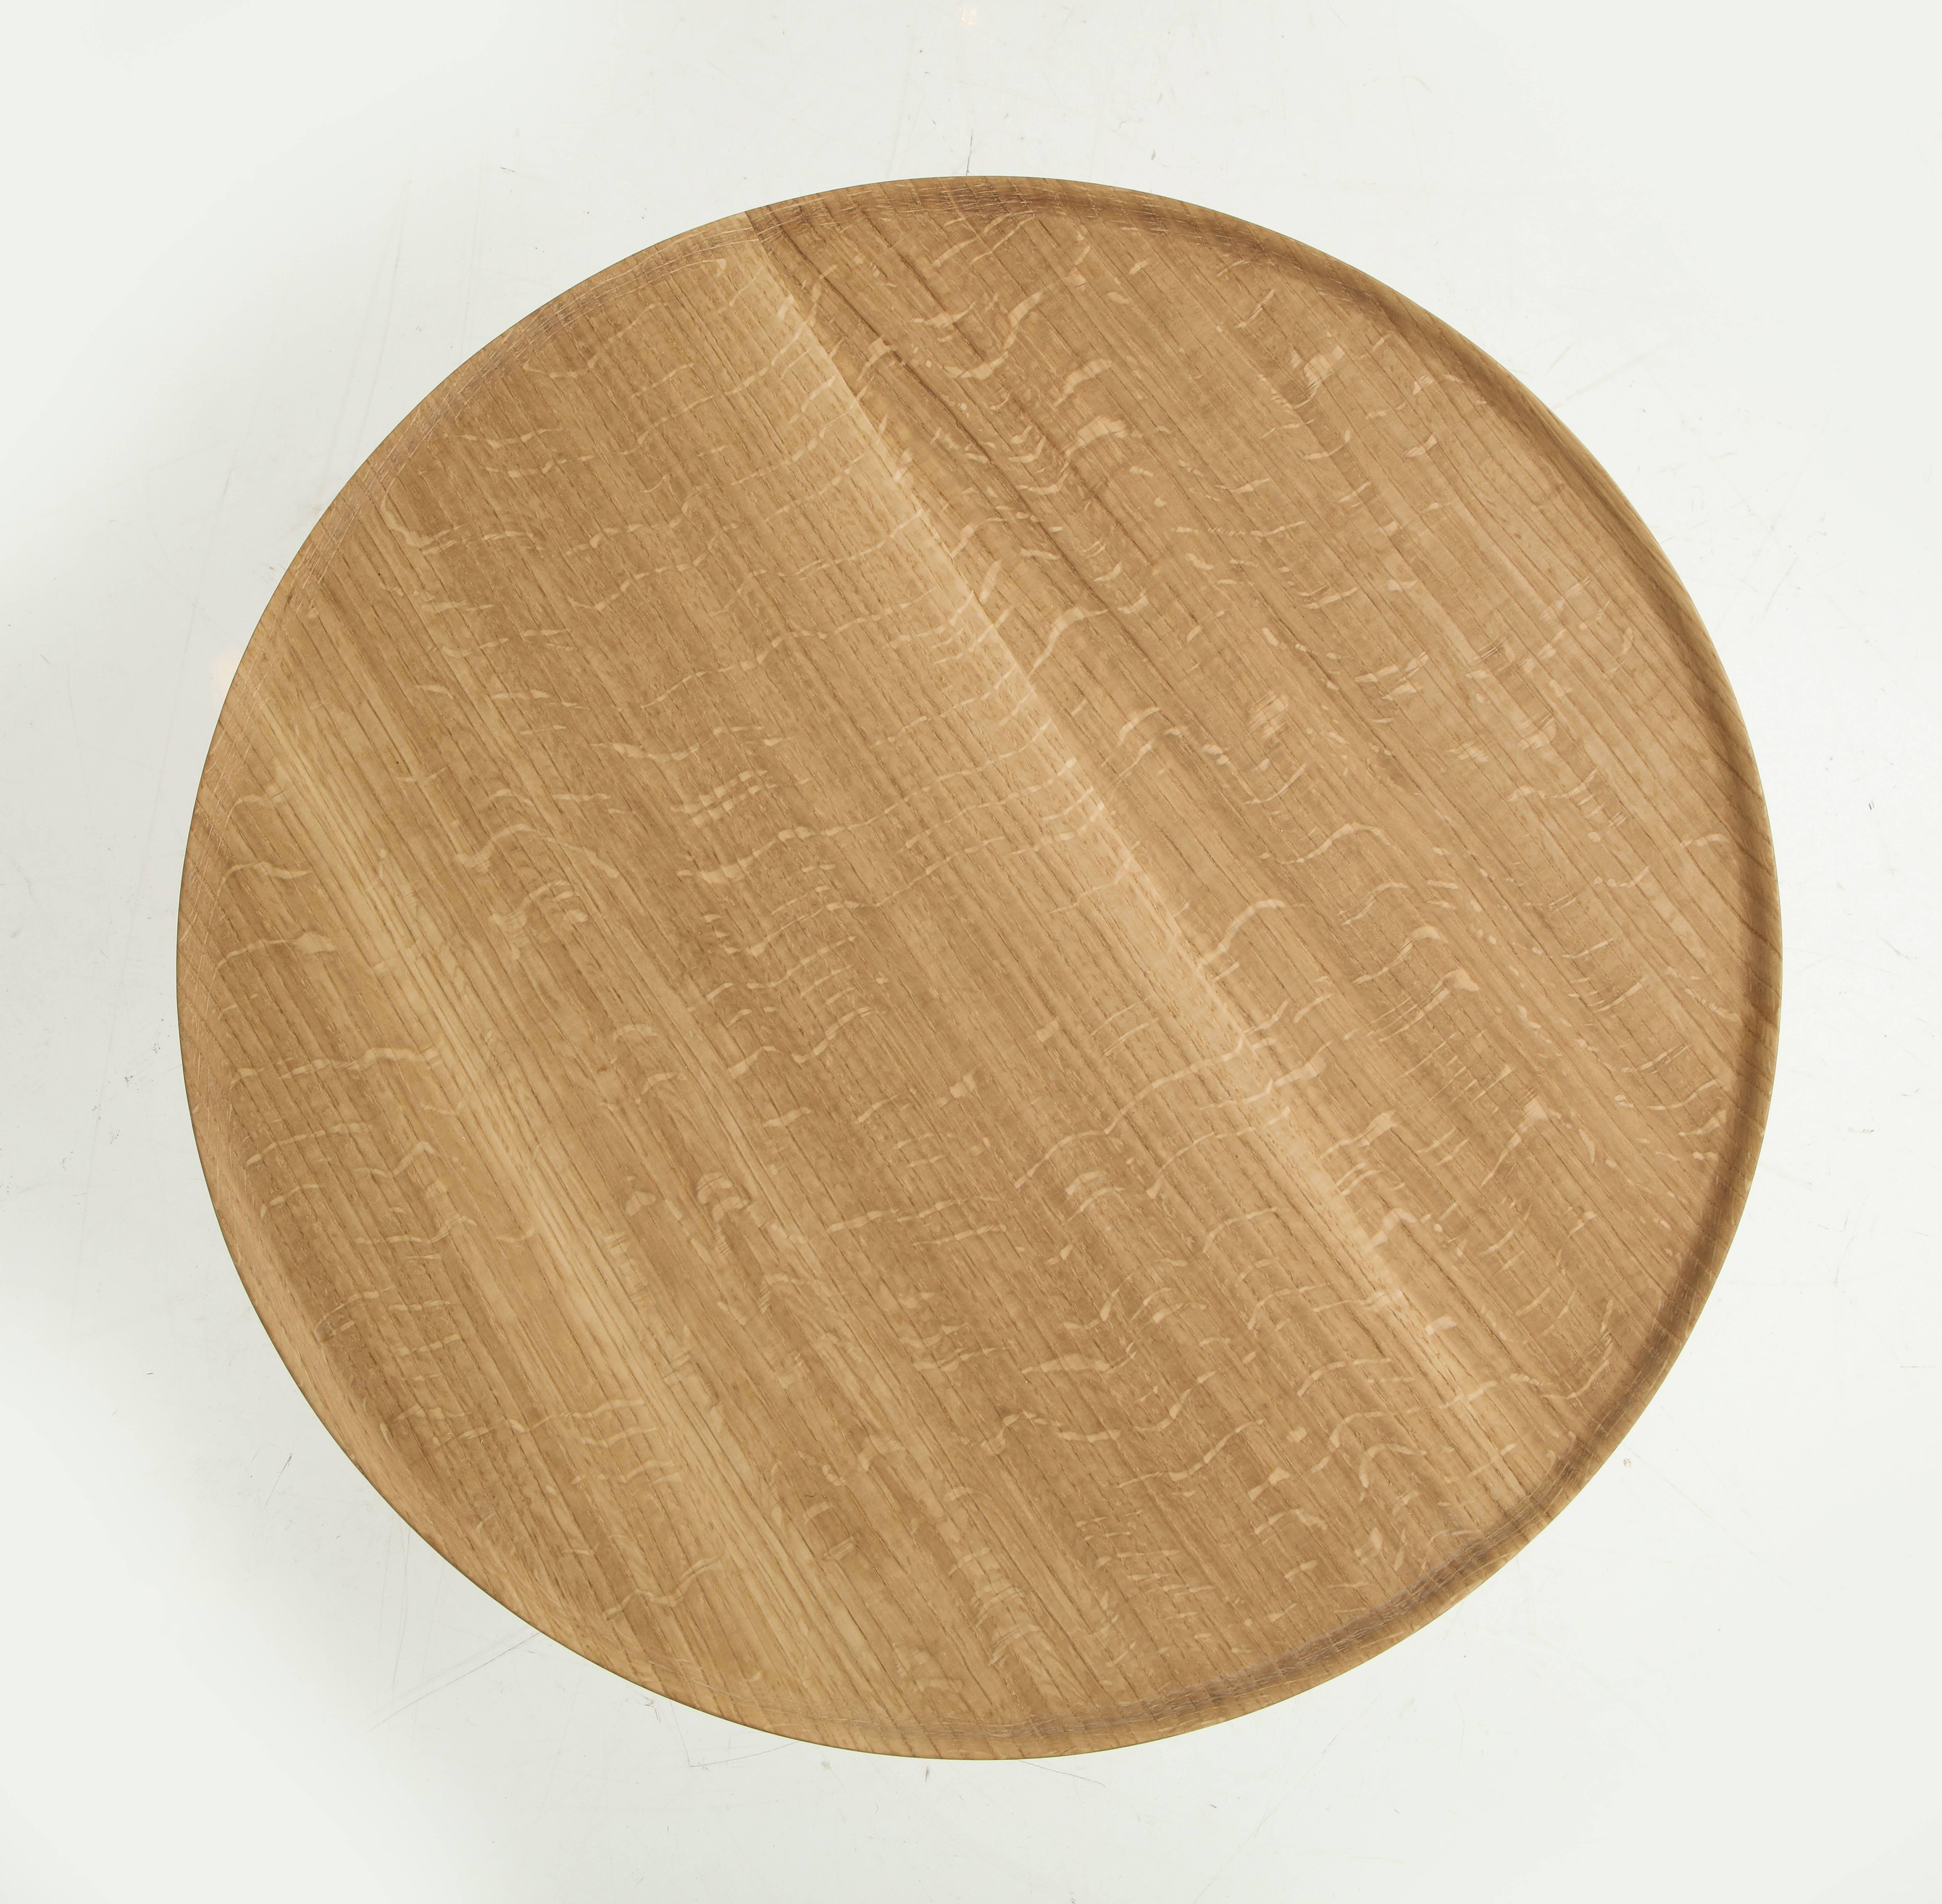 Graciously designed solid wood tray tables in three different sizes and proportions which can be placed in a group or individually. The bases are tapered toward the outer rims with spherical curvature. Thin edged tray tops adds gracious presence to